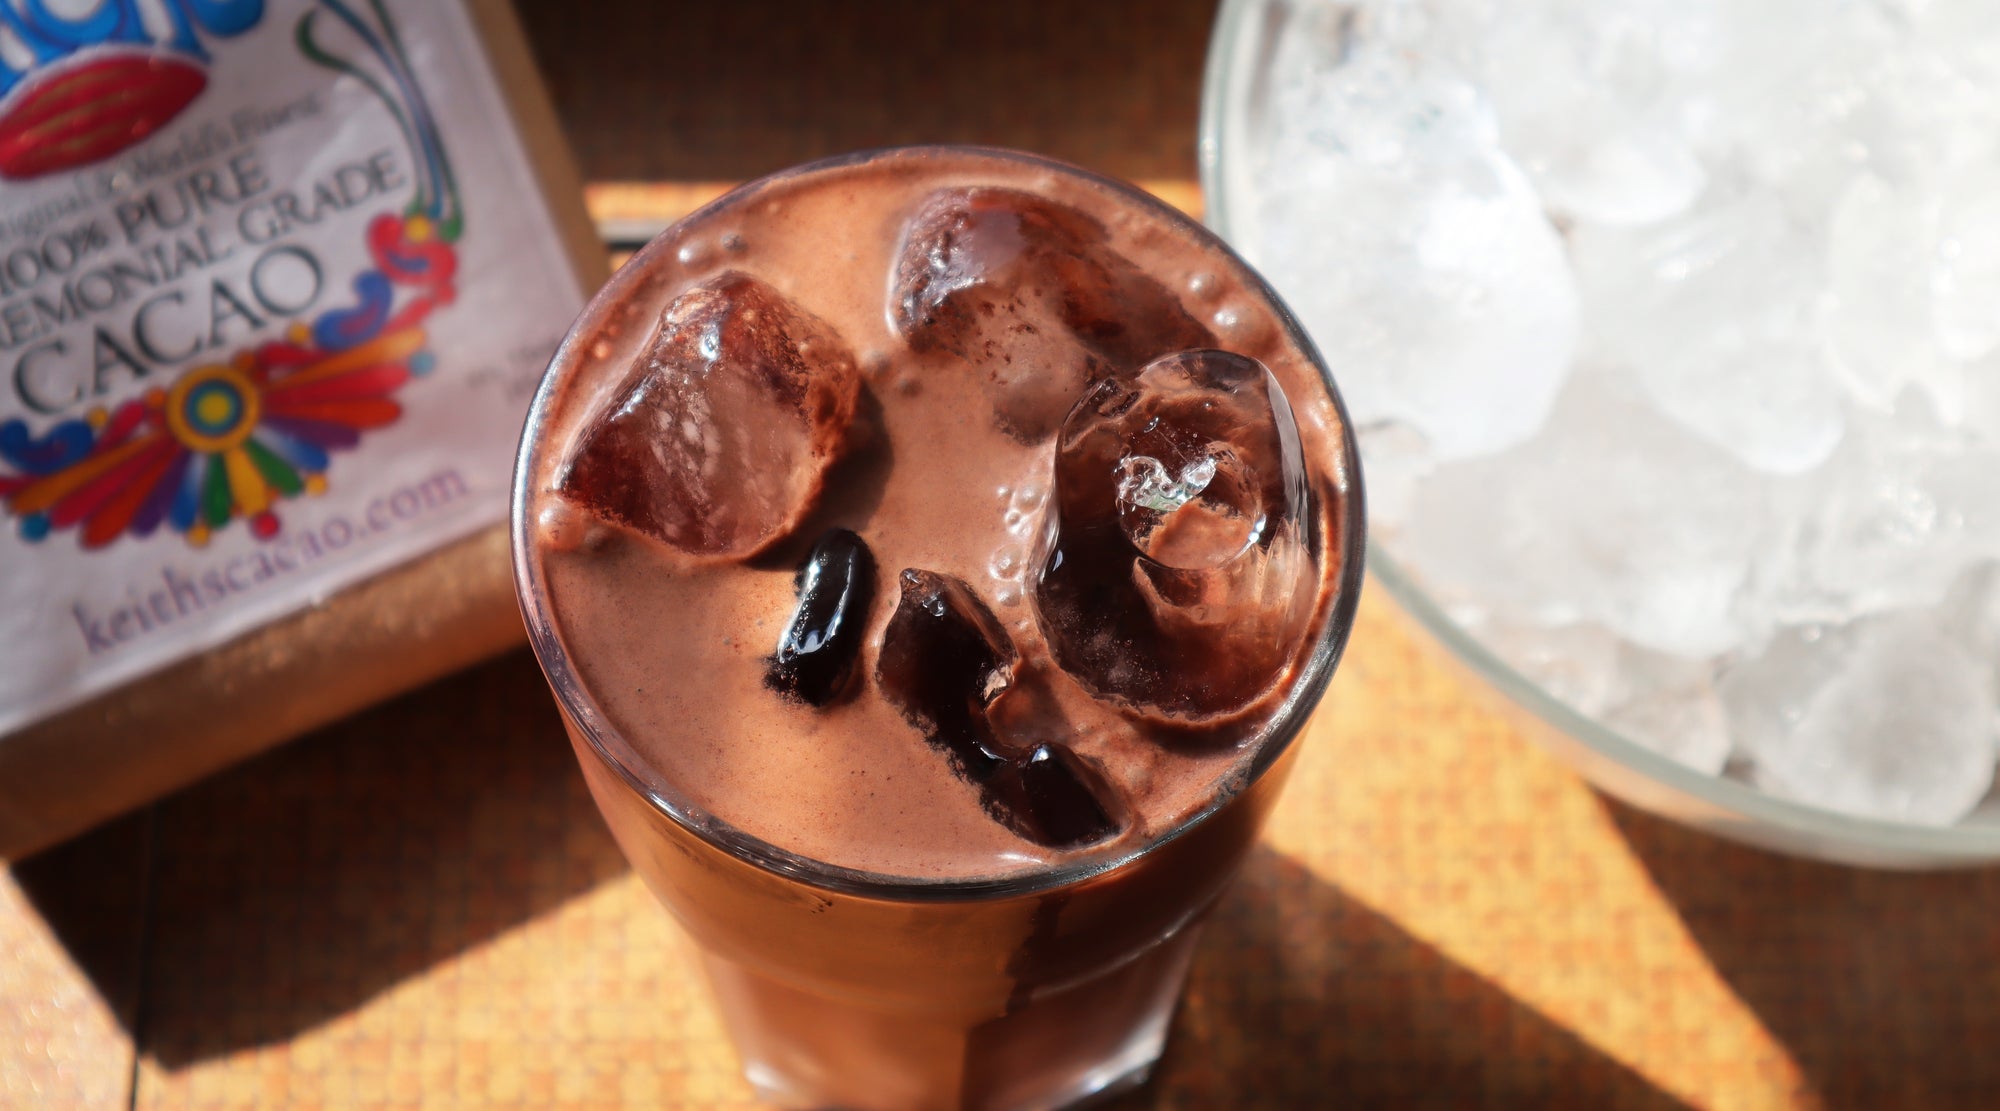 Dive into summer with Iced Keith's Cacao!